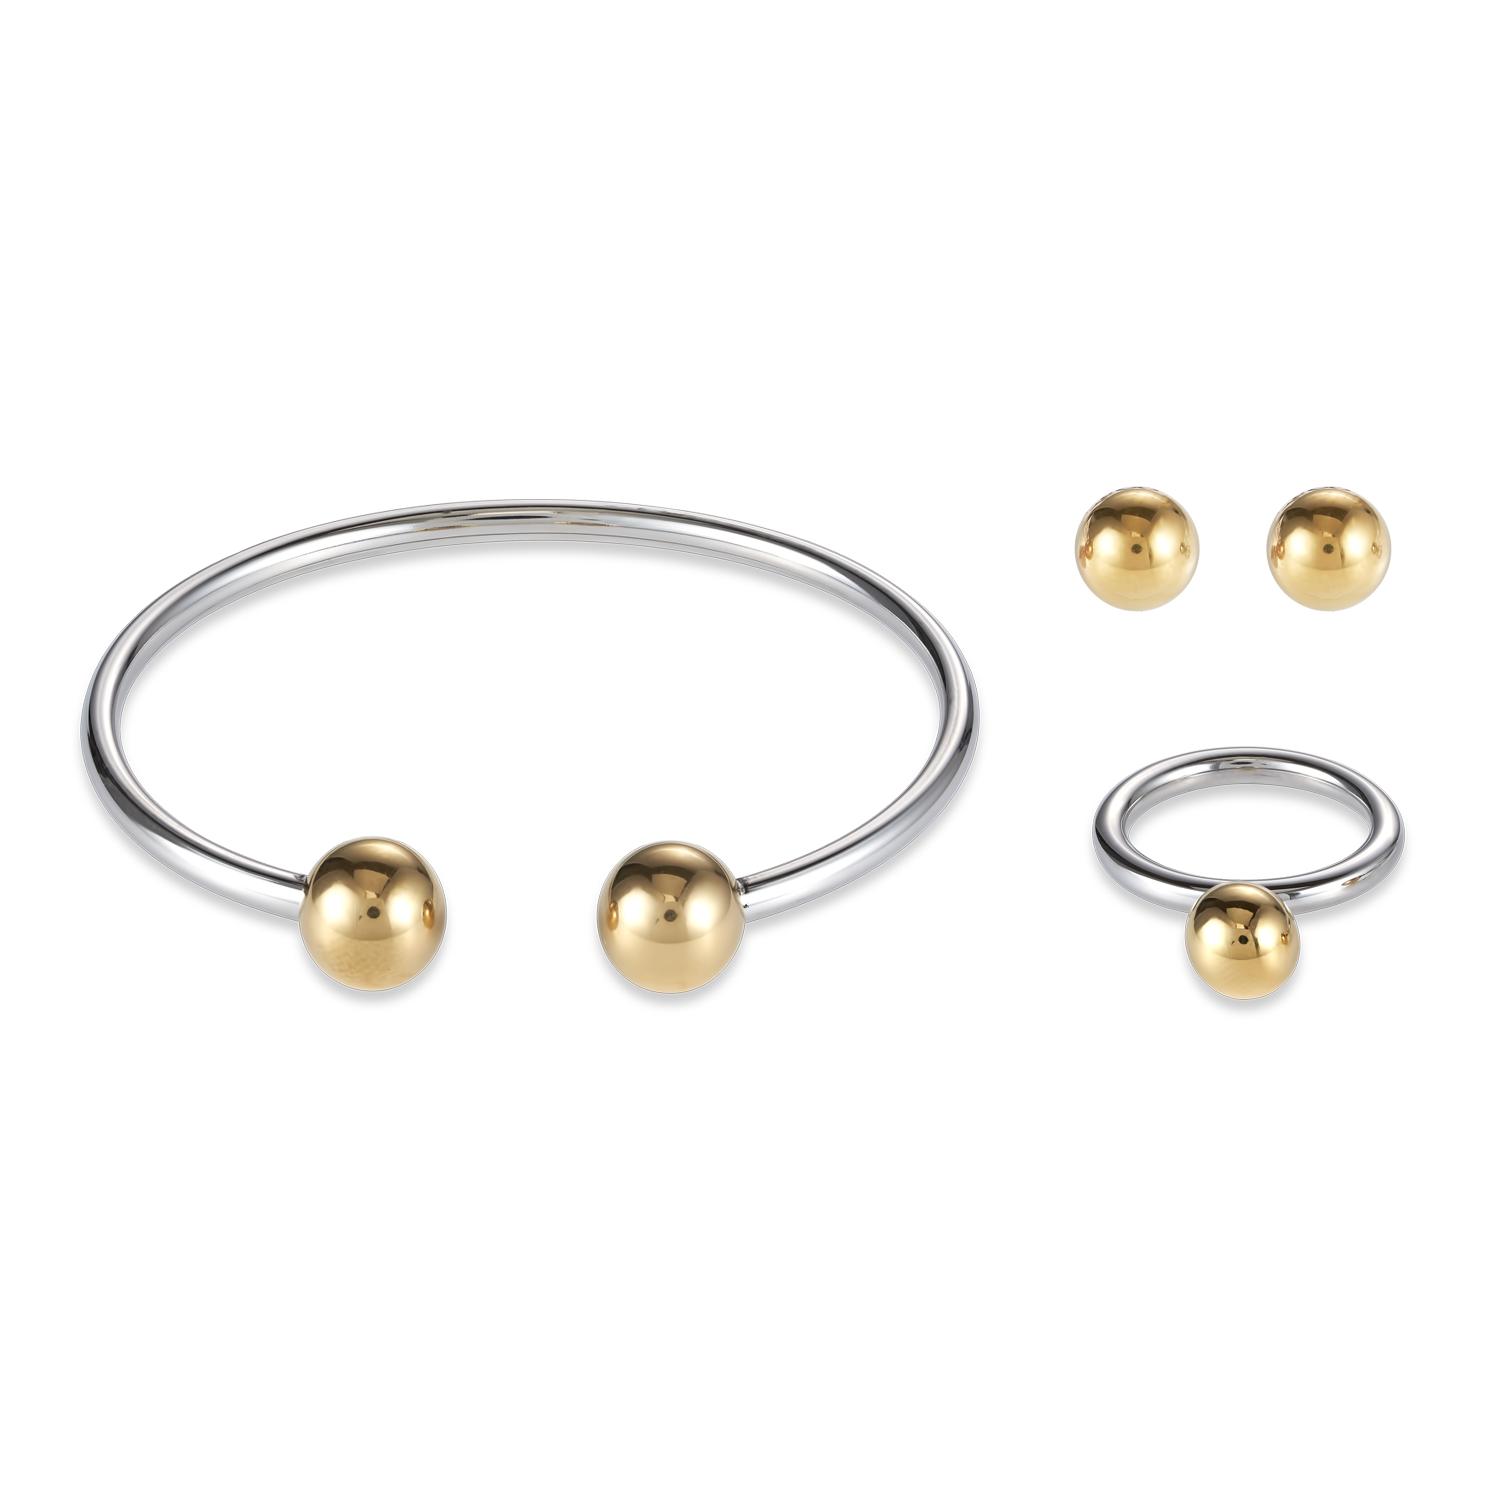 Bangle stainless steel balls gold